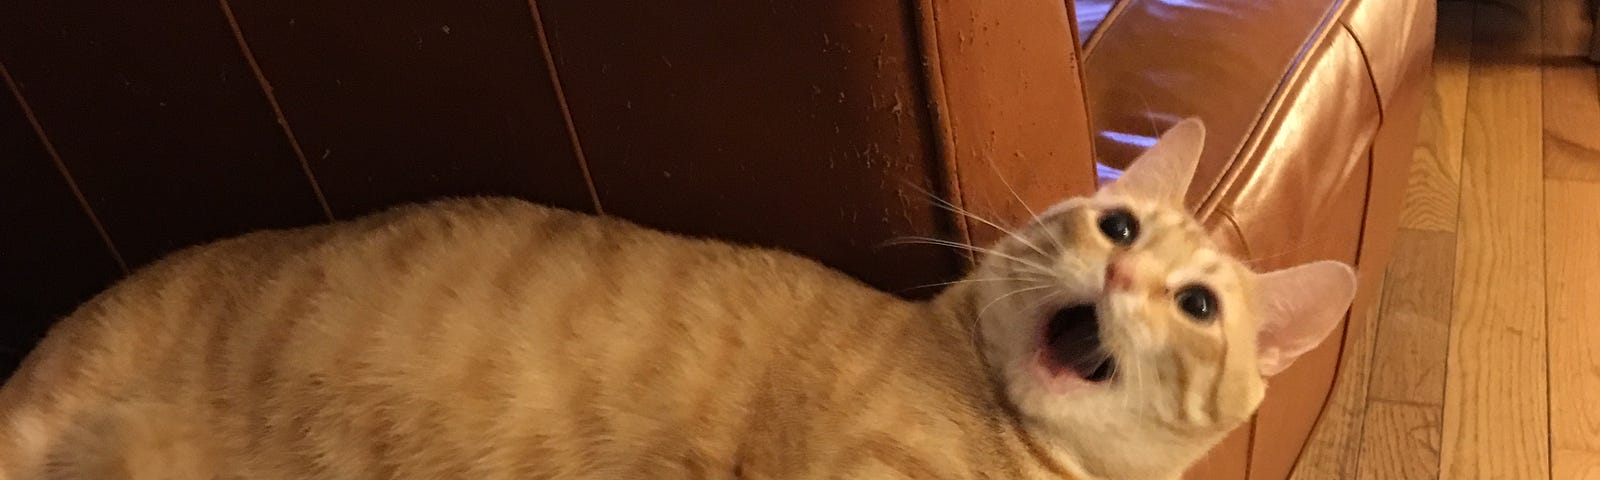 Author’s photo of Bernie, a yellow cat lying on a coffee table with his mouth open in surprise.